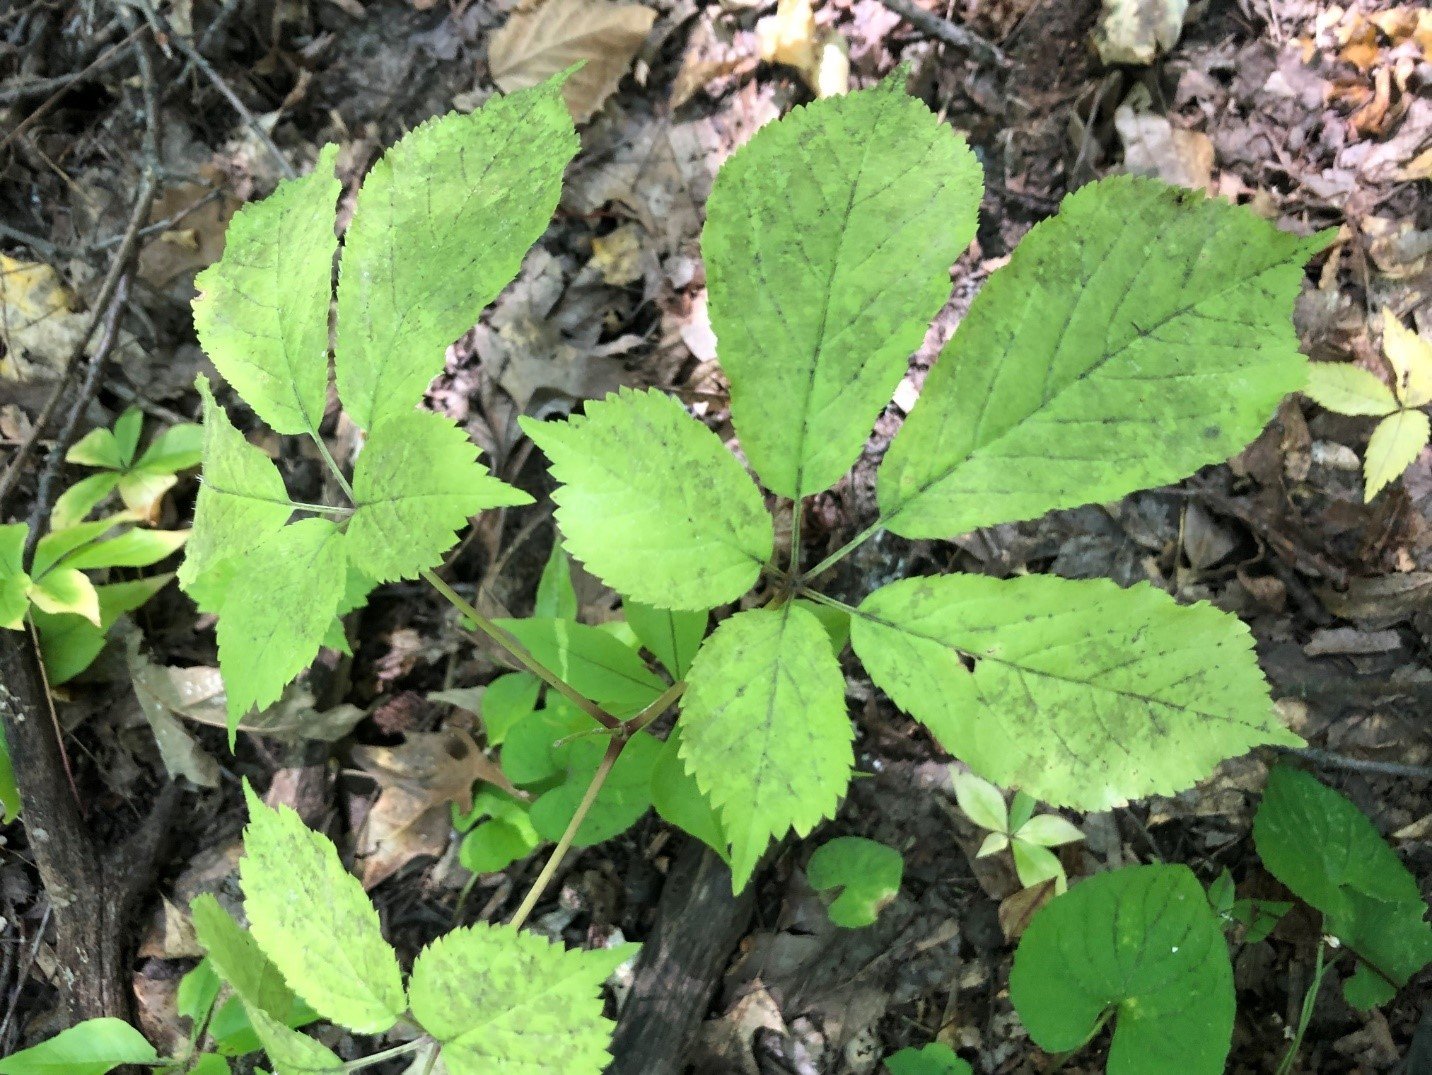  American ginseng ( Panax quinquefolius ), shown above, is just one of an incredible number of high native plants growing in Rita’s woodland. In spring, the forest floor is carpeted with native white trillium ( Trillium grandiflorum ) 